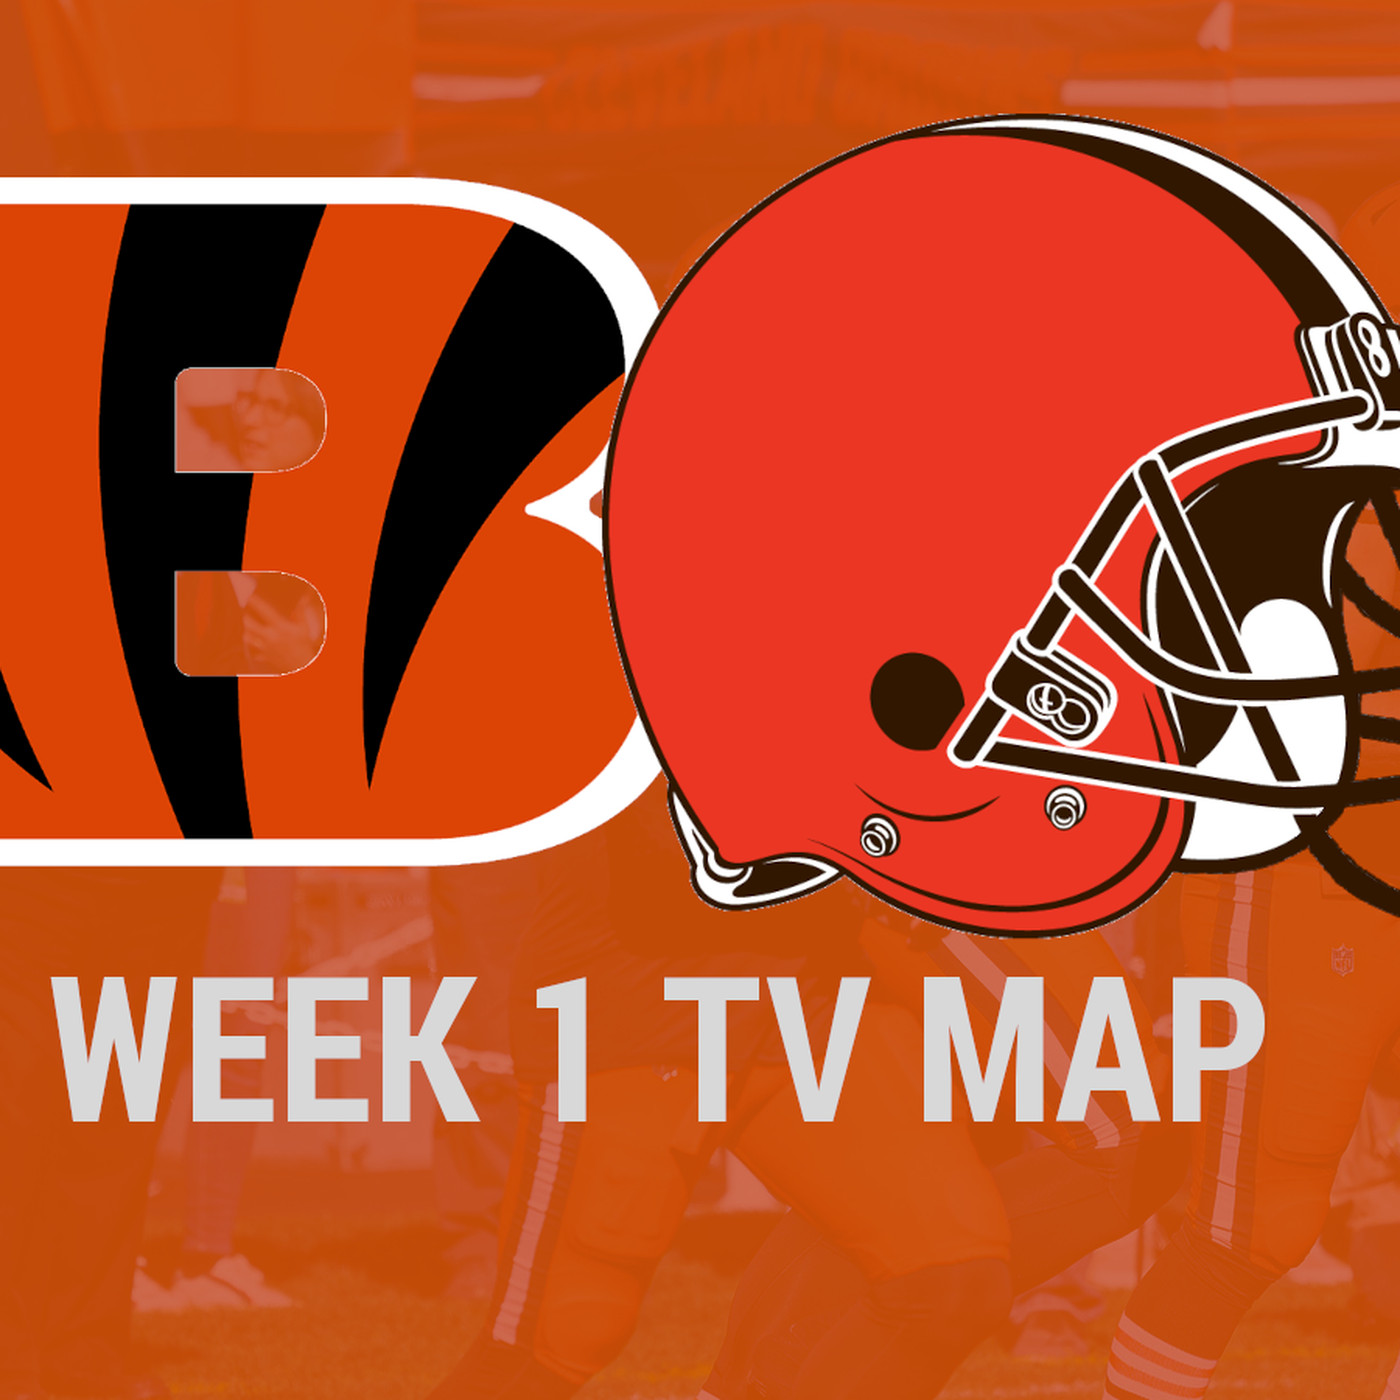 channel is the cleveland browns game on